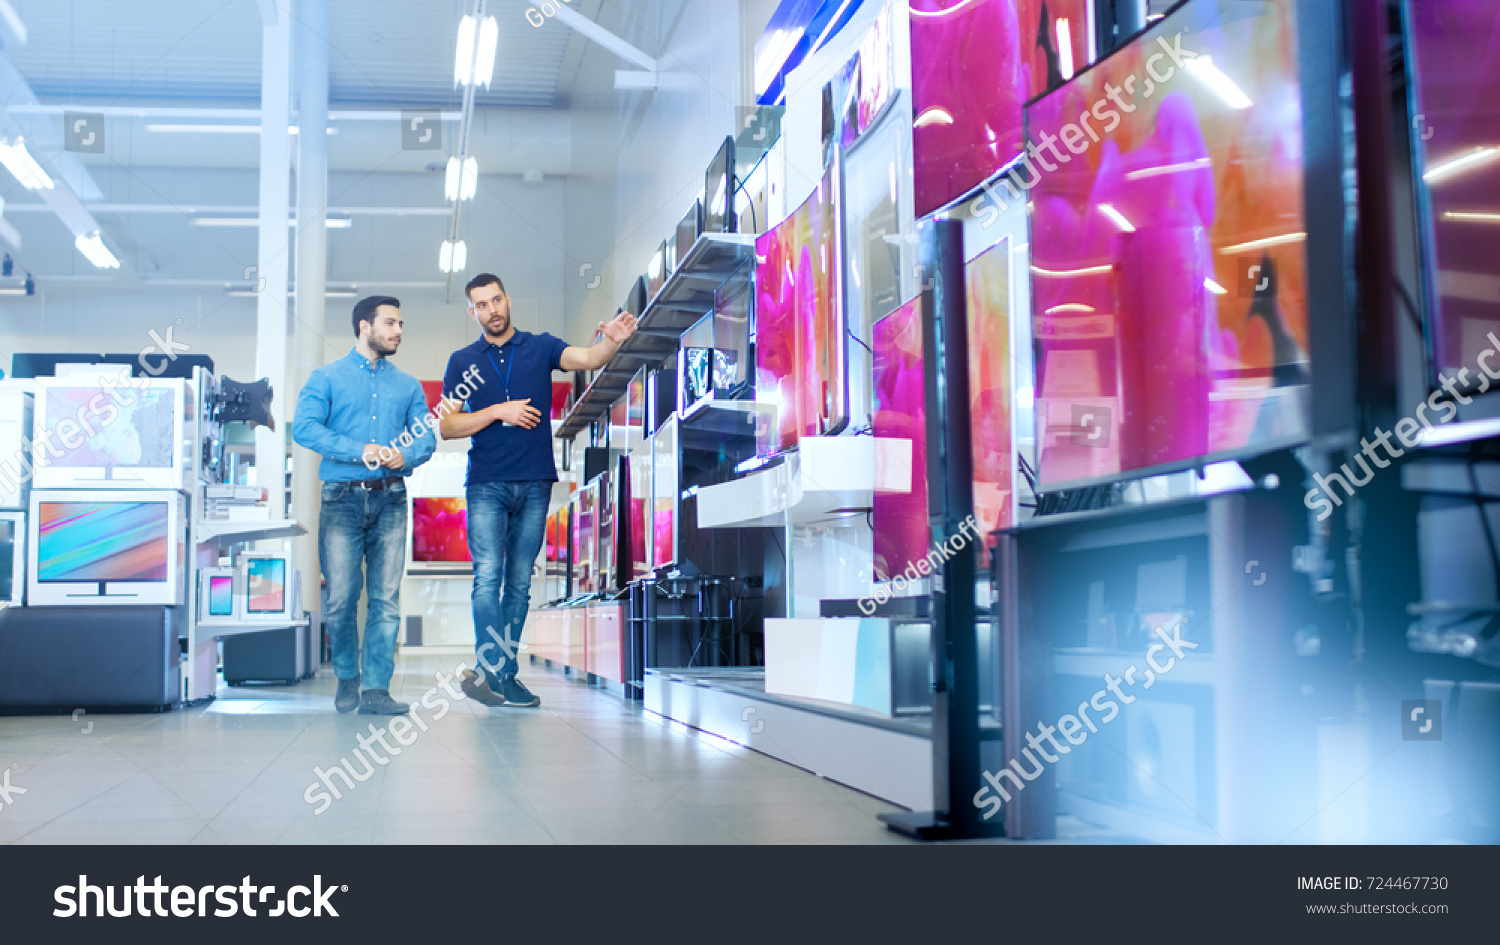 In the Electronics Store Professional Consultant Shows Latest 4K UHD TV's to a Young Man, They Talk about Specifications and What Model is Best for Young Man's Home. Store is Bright. #724467730